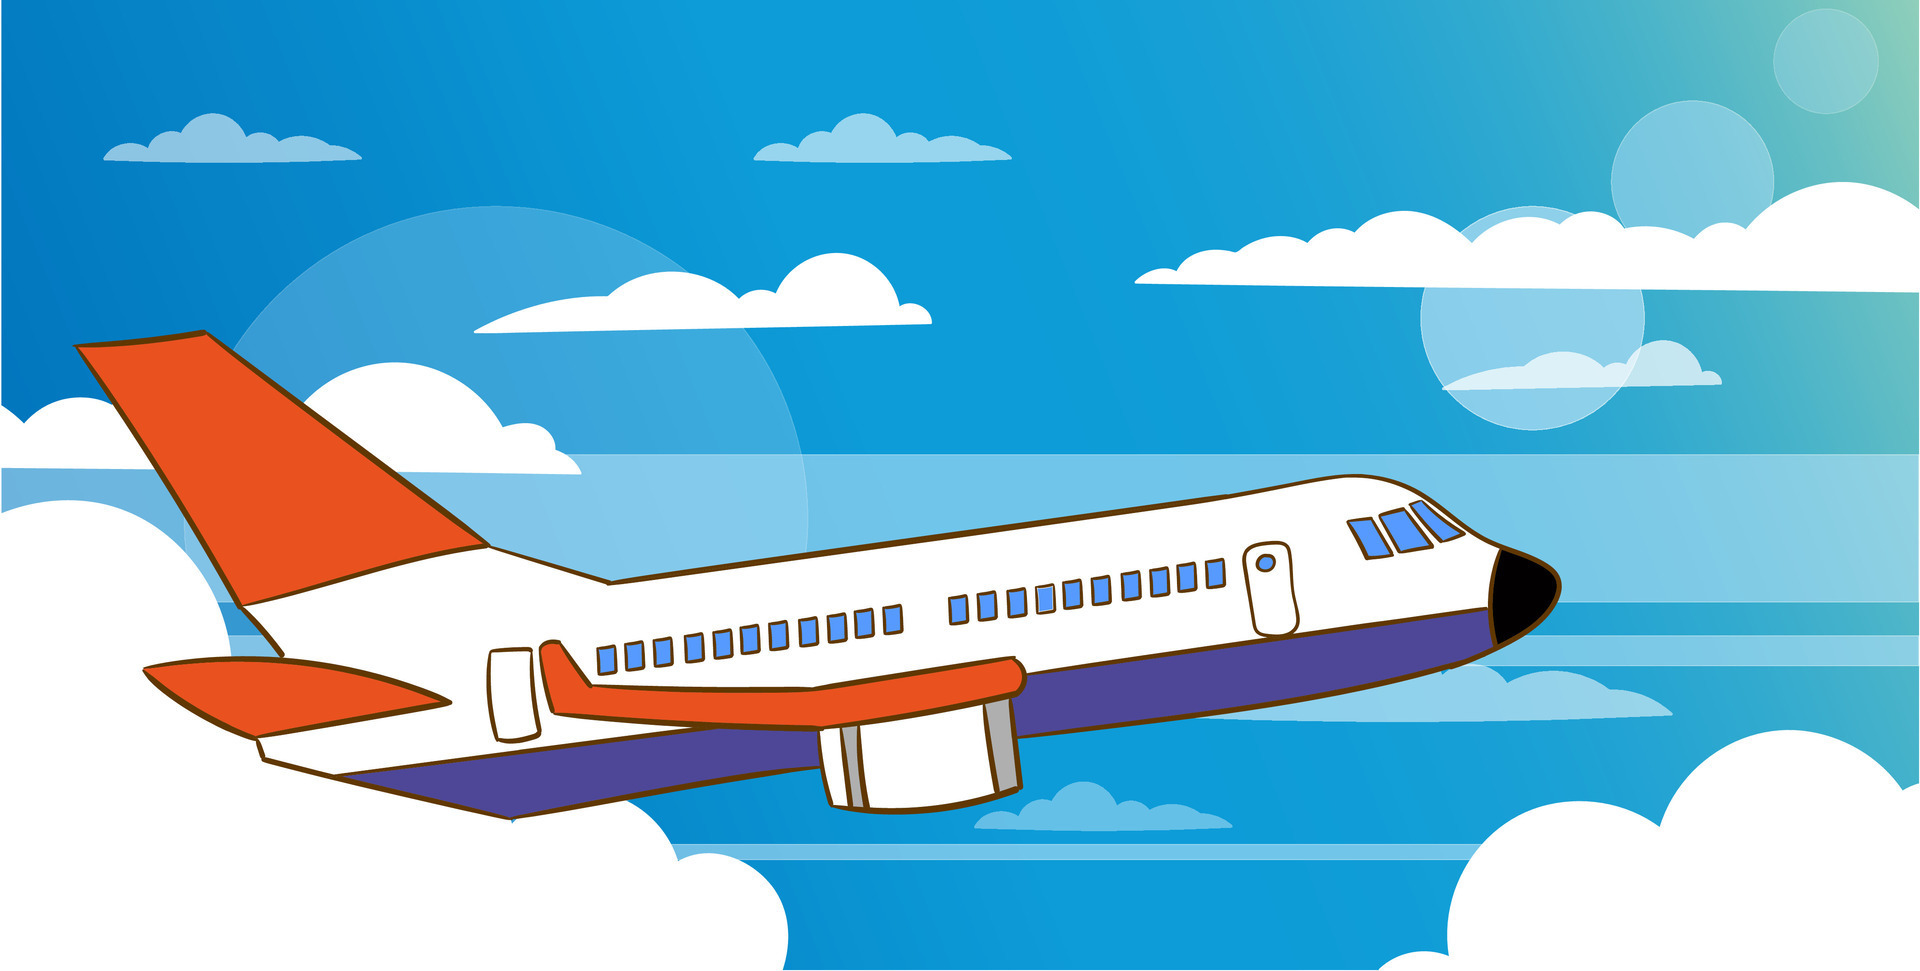 Airplane flying in sky. Jet plane fly in clouds, airplanes travel and  vacation aircraft. Flight plane, airplane trip to airport or airline  transportation.Flat airplane vector illustration, Stock Vector